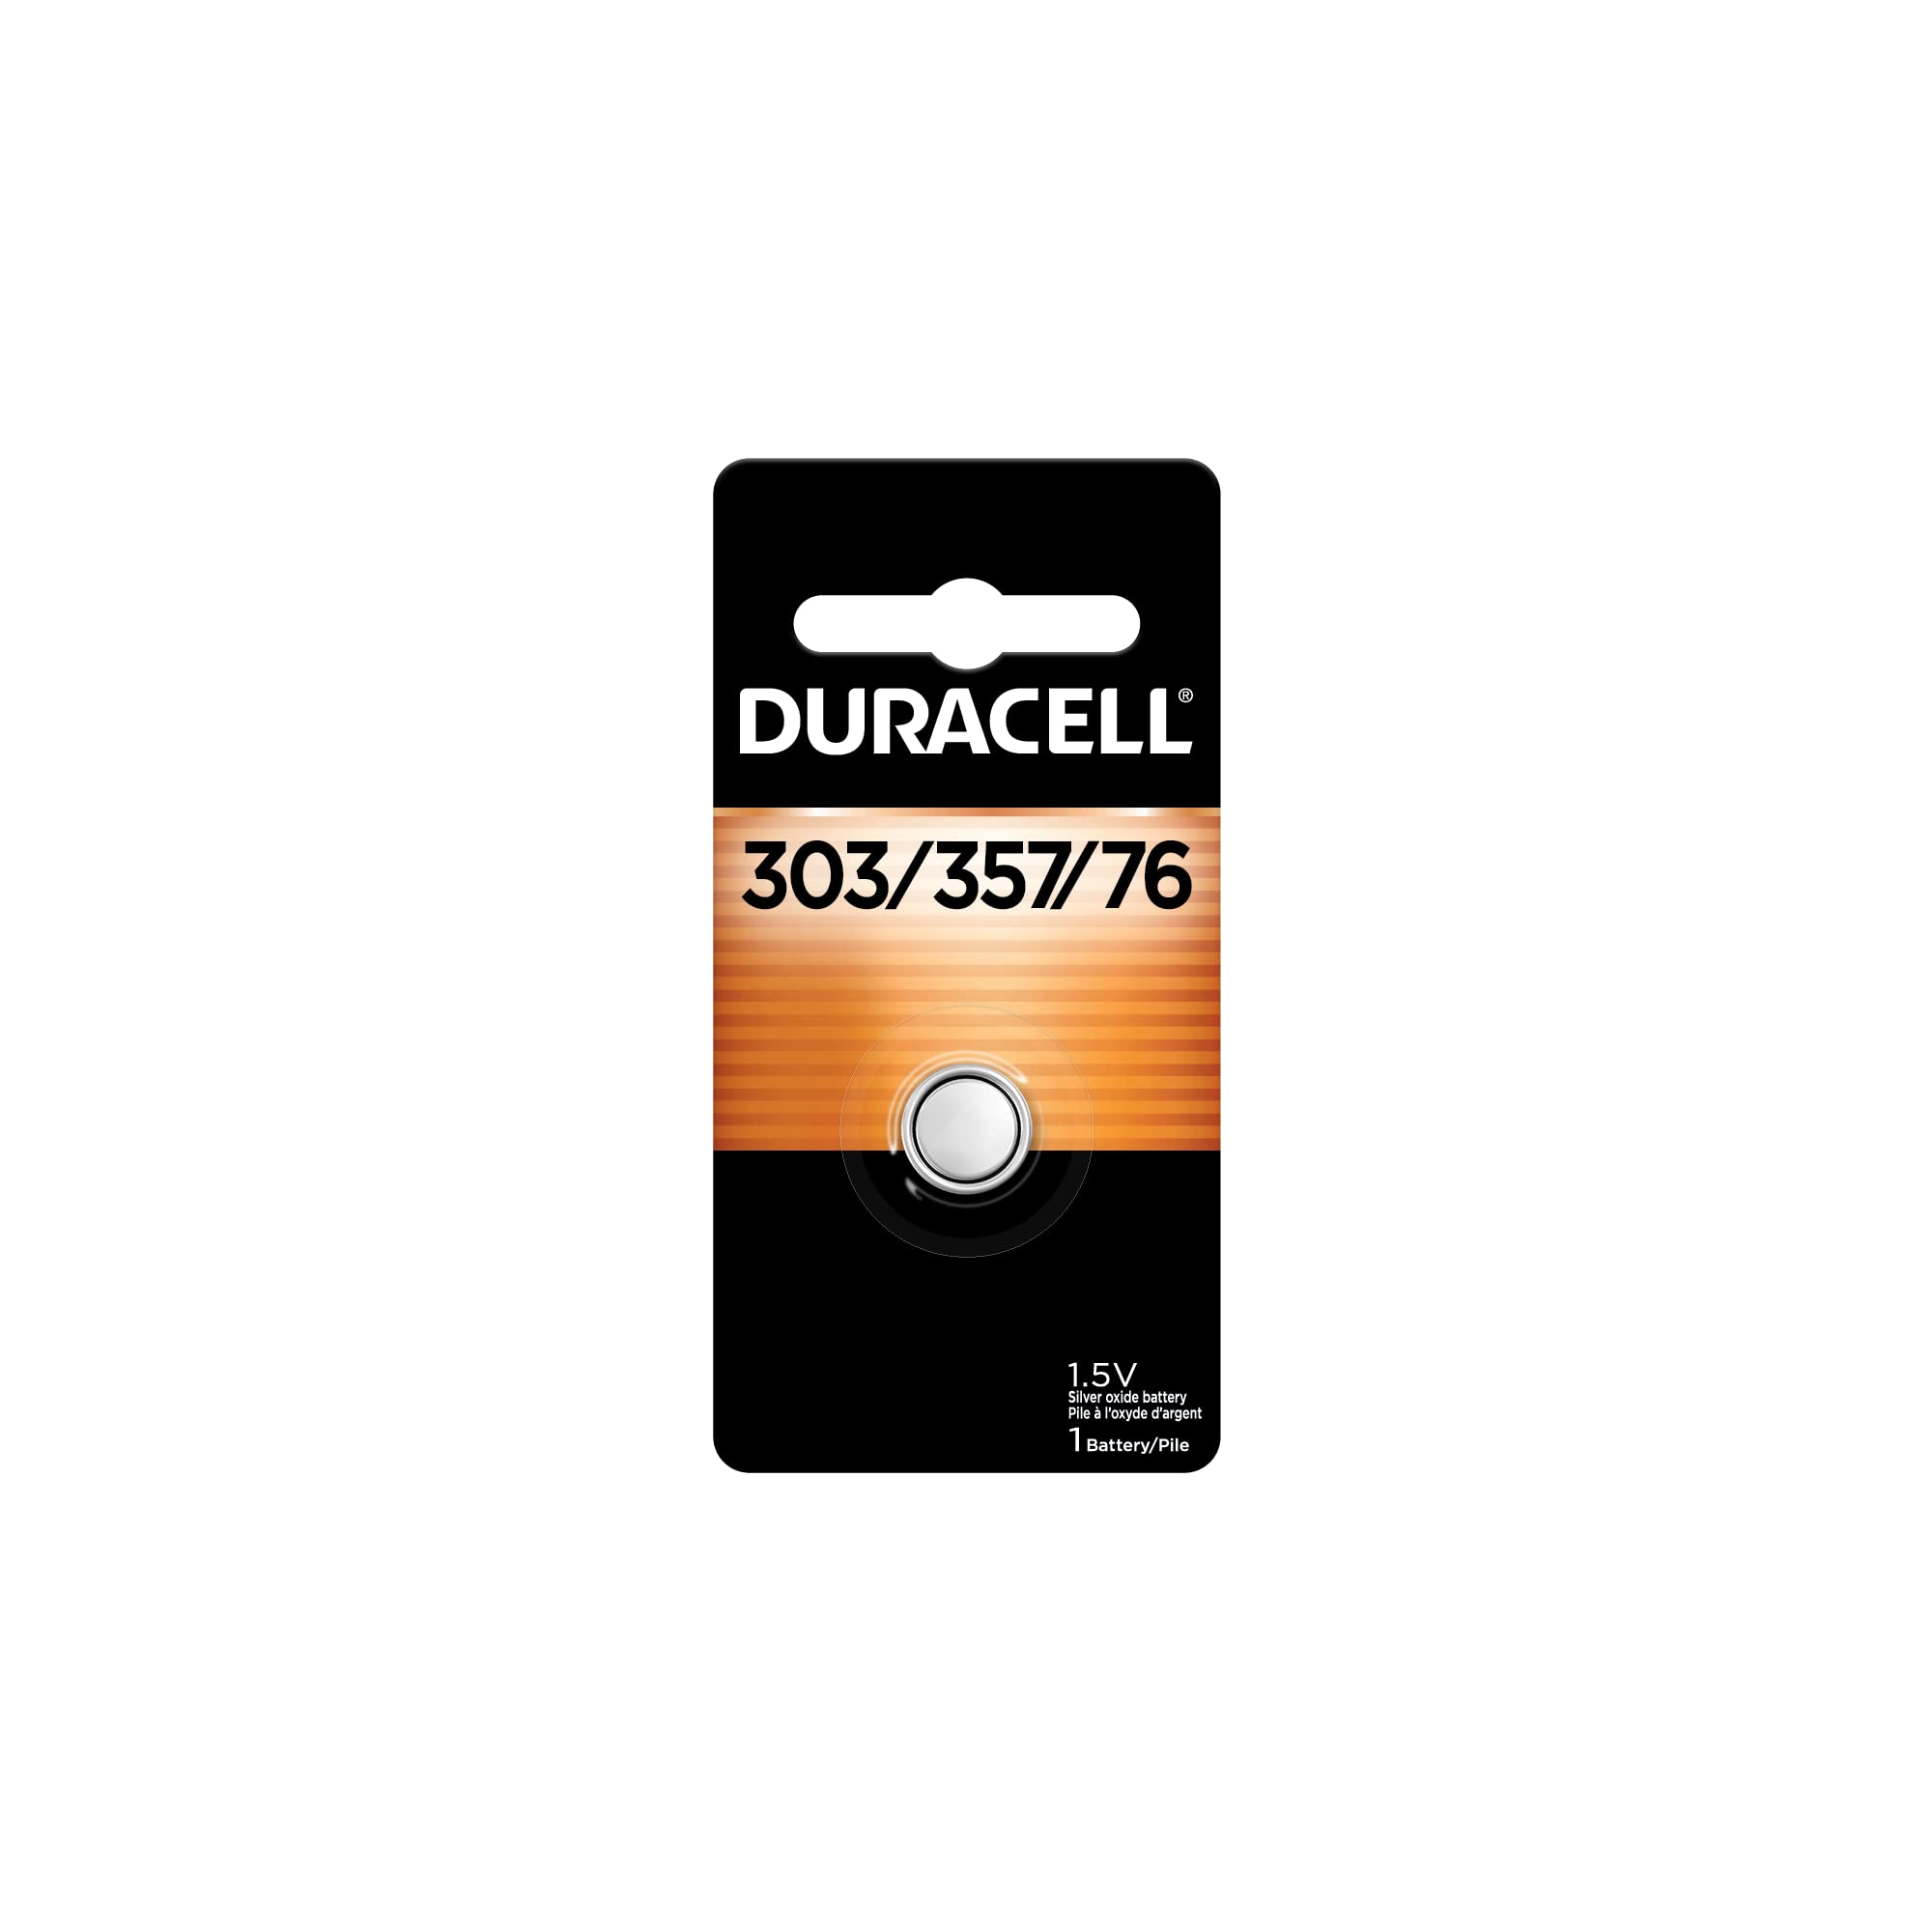 Duracell 303/357/76 Silver Oxide Button Battery, 1 Count Pack, 303/357/76 1.5 Volt Battery, Long-Lasting for Watches, Medical Devices, Calculators, and More